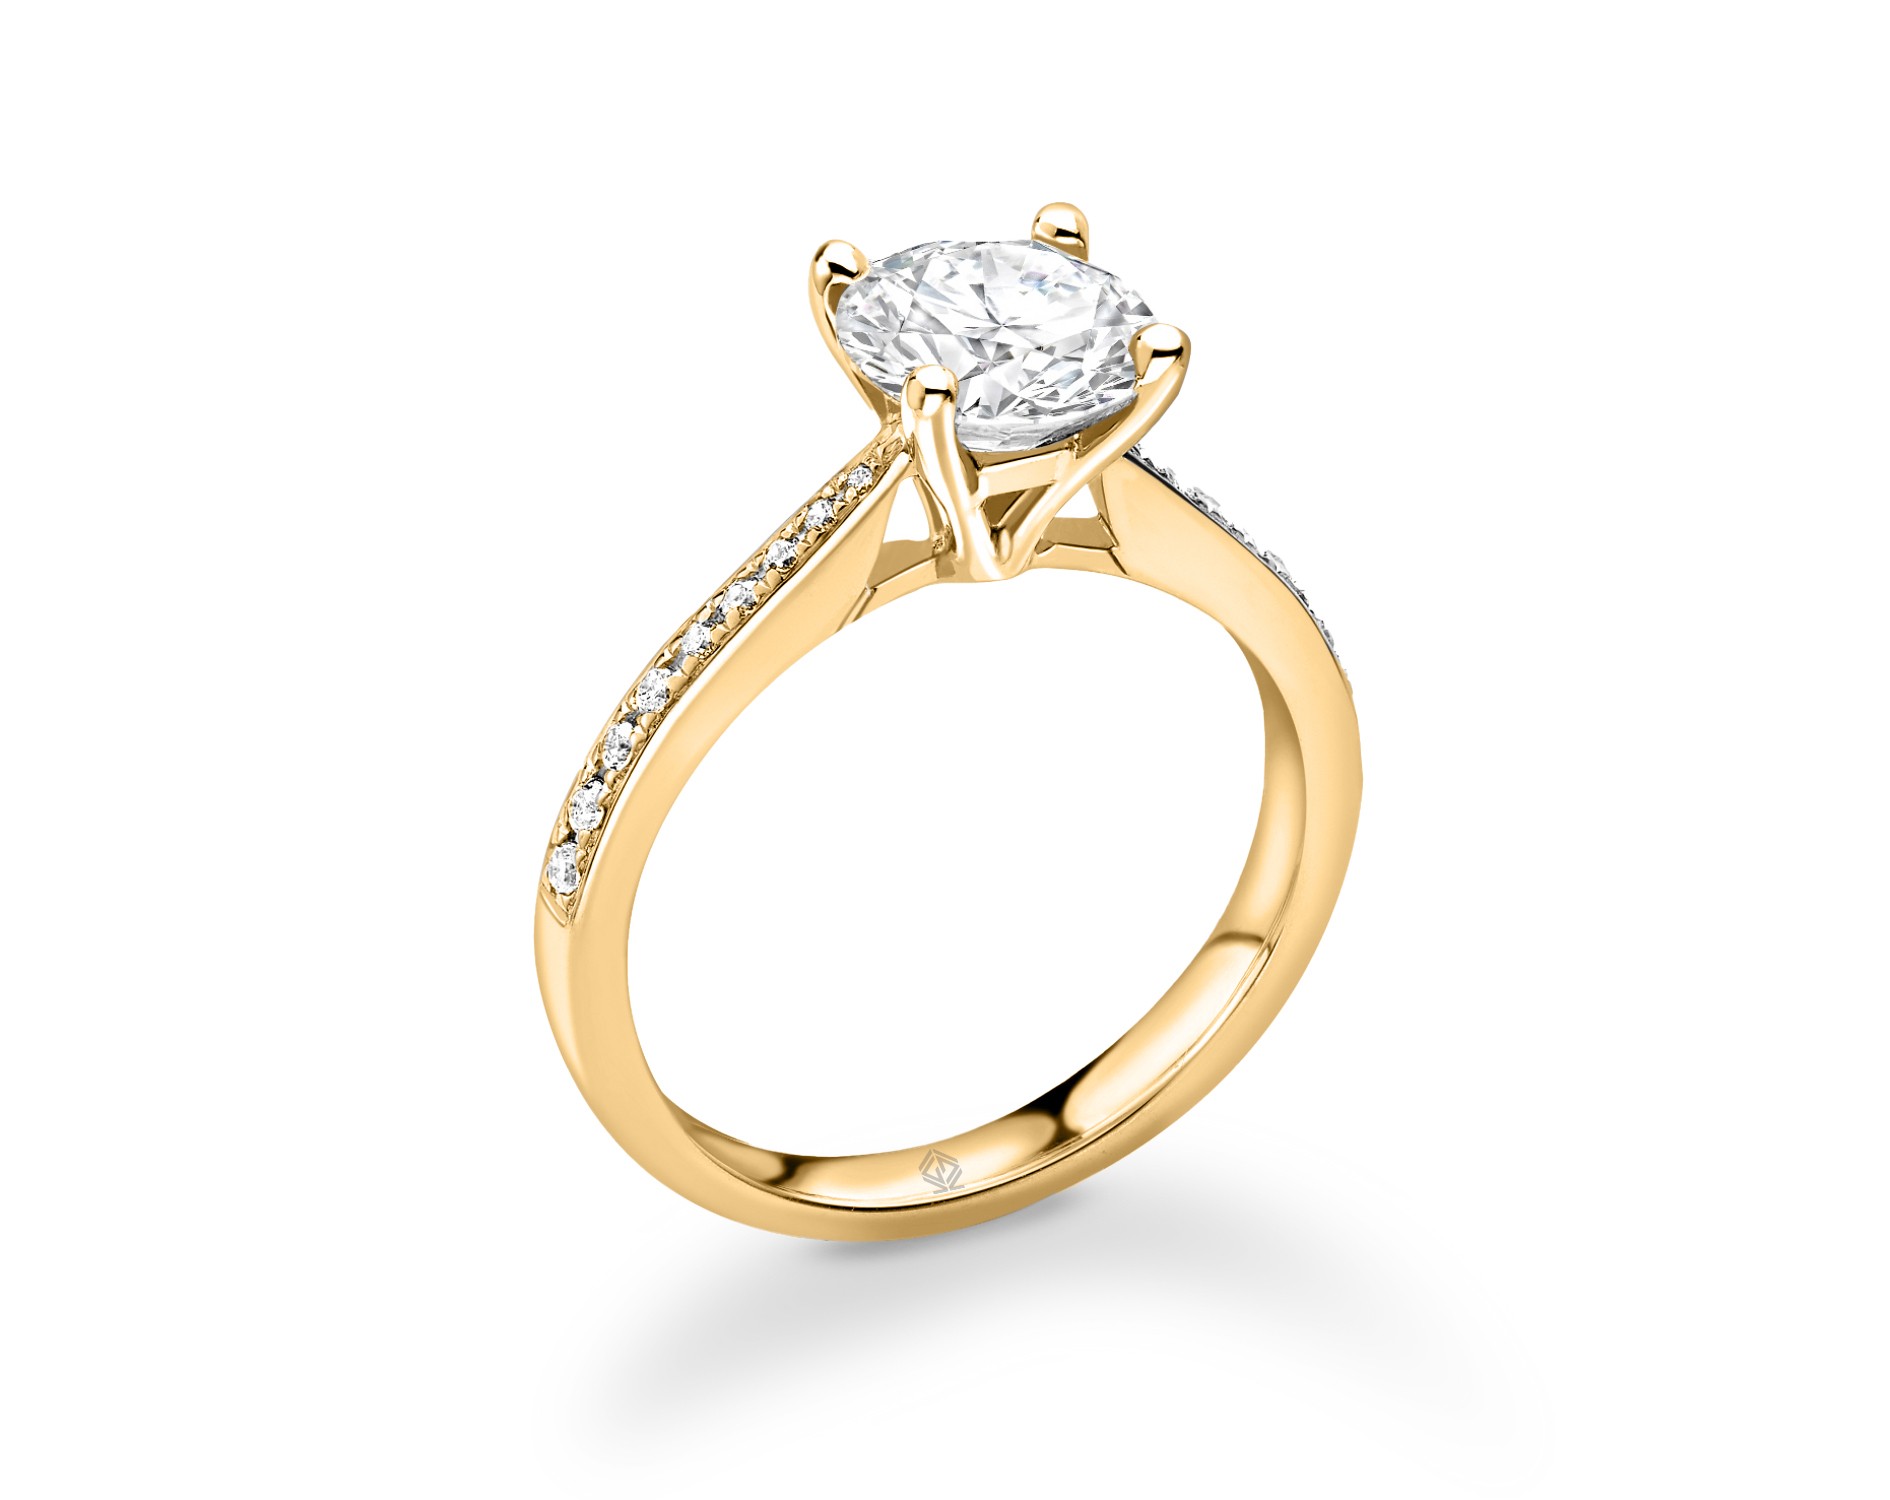 18K YELLOW GOLD 4 PRONG DIAMOND ENGAGEMENT RING WITH SIDE STONES IN PRONG SET